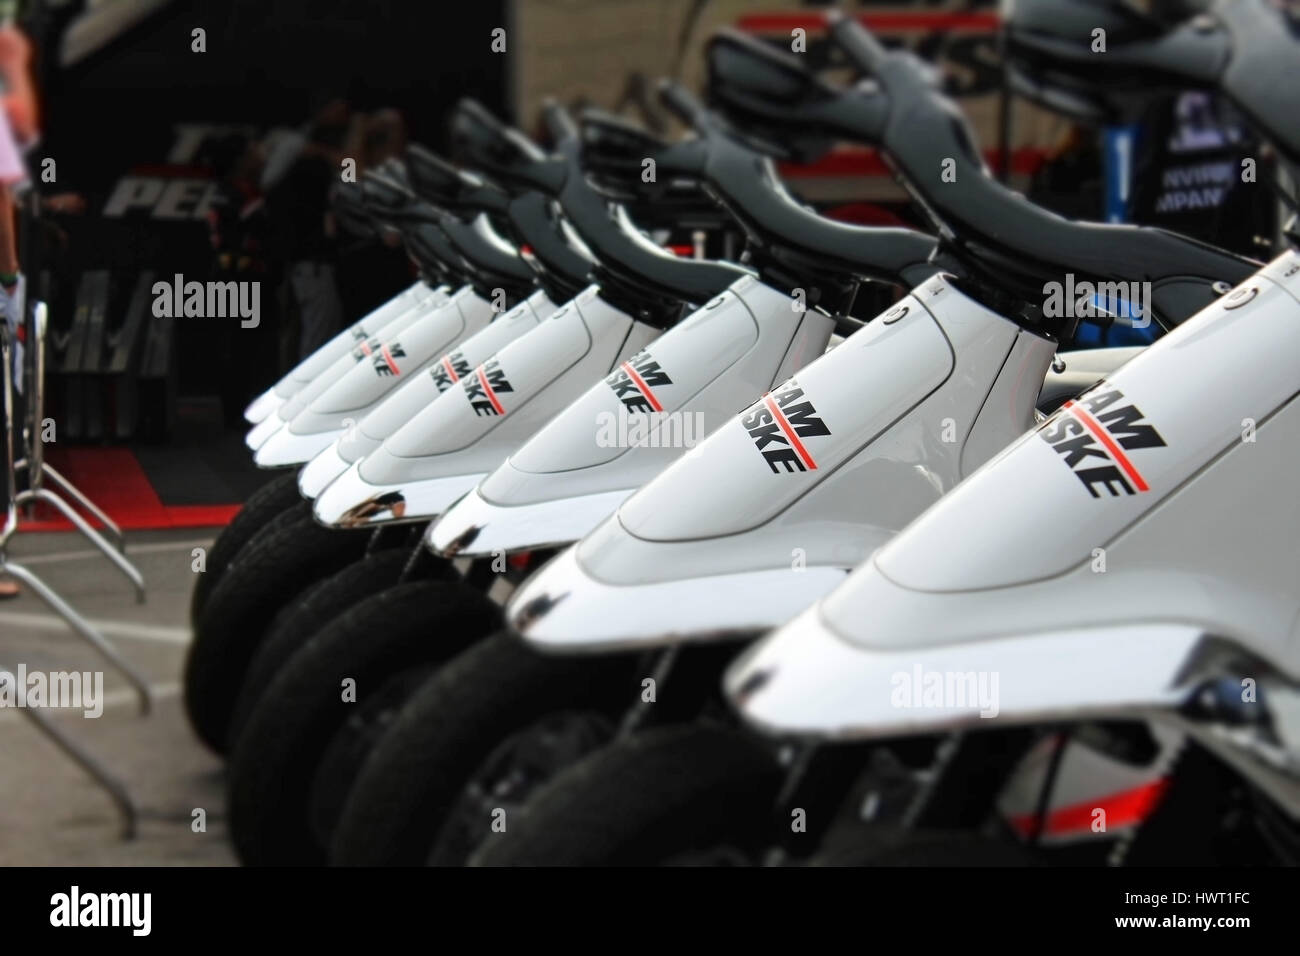 Team Penske scooters lined up in the paddock at the 2017 Indycar Grand Prix of St Petersburg. Stock Photo